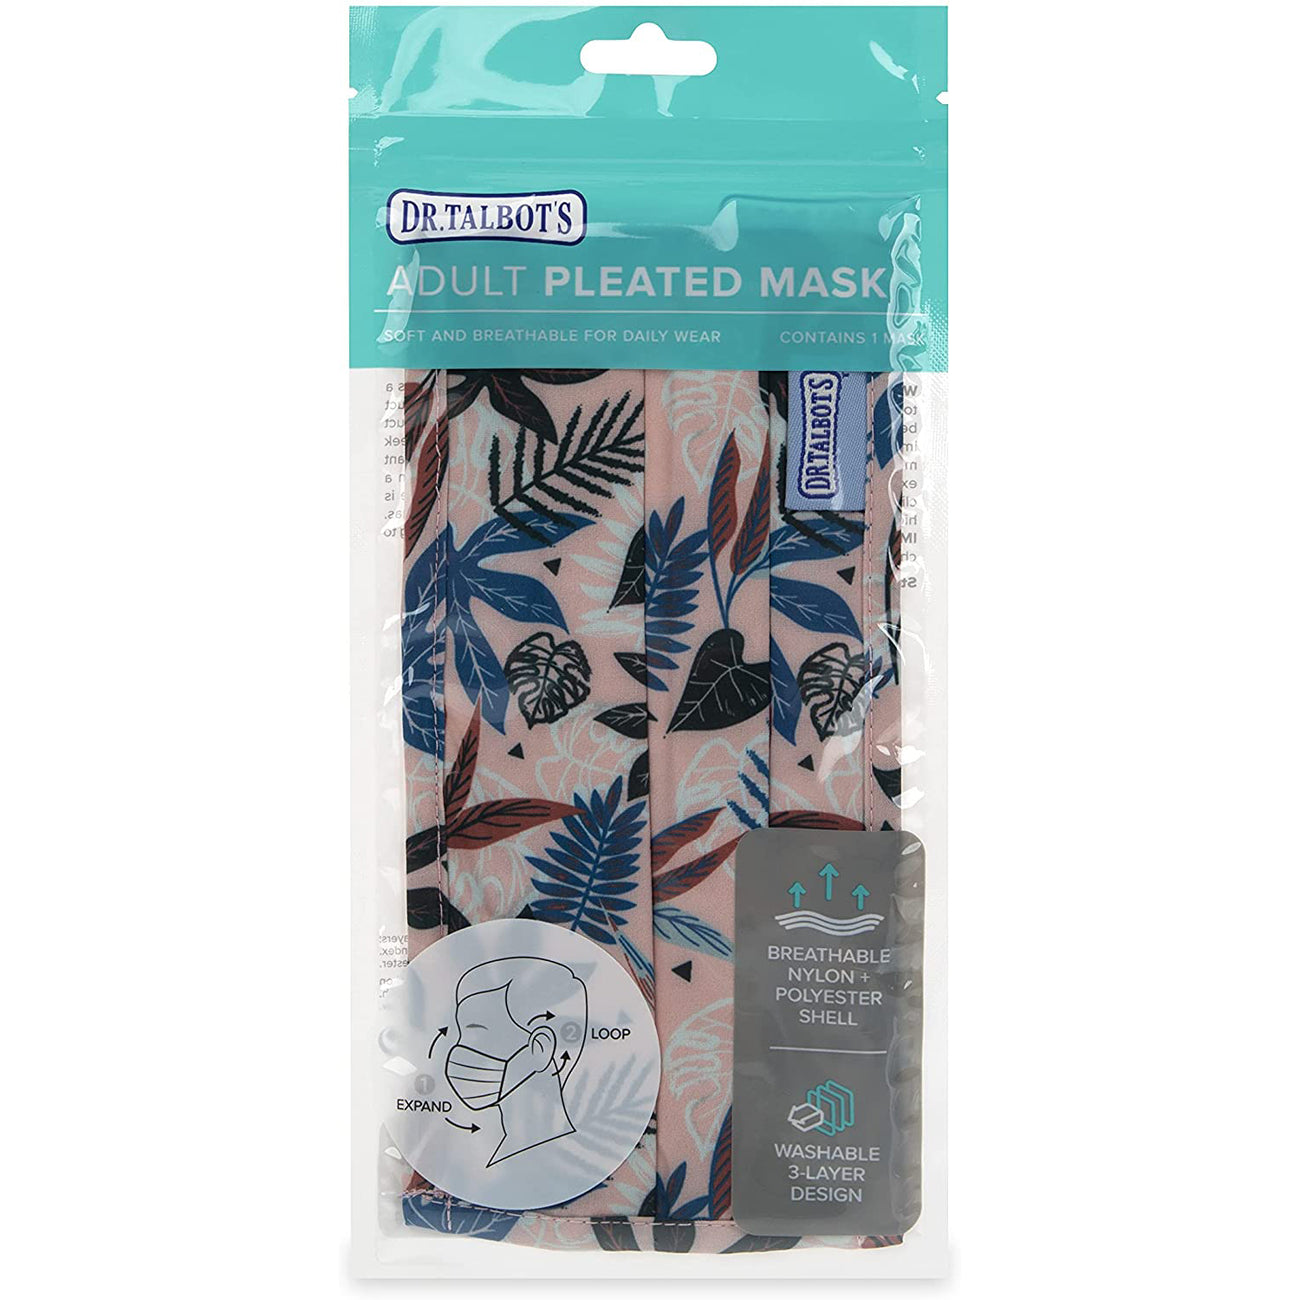 Adult Pleated Cloth Mask - 1 pack - Multi-colored Leaves - Dr Talbot's US